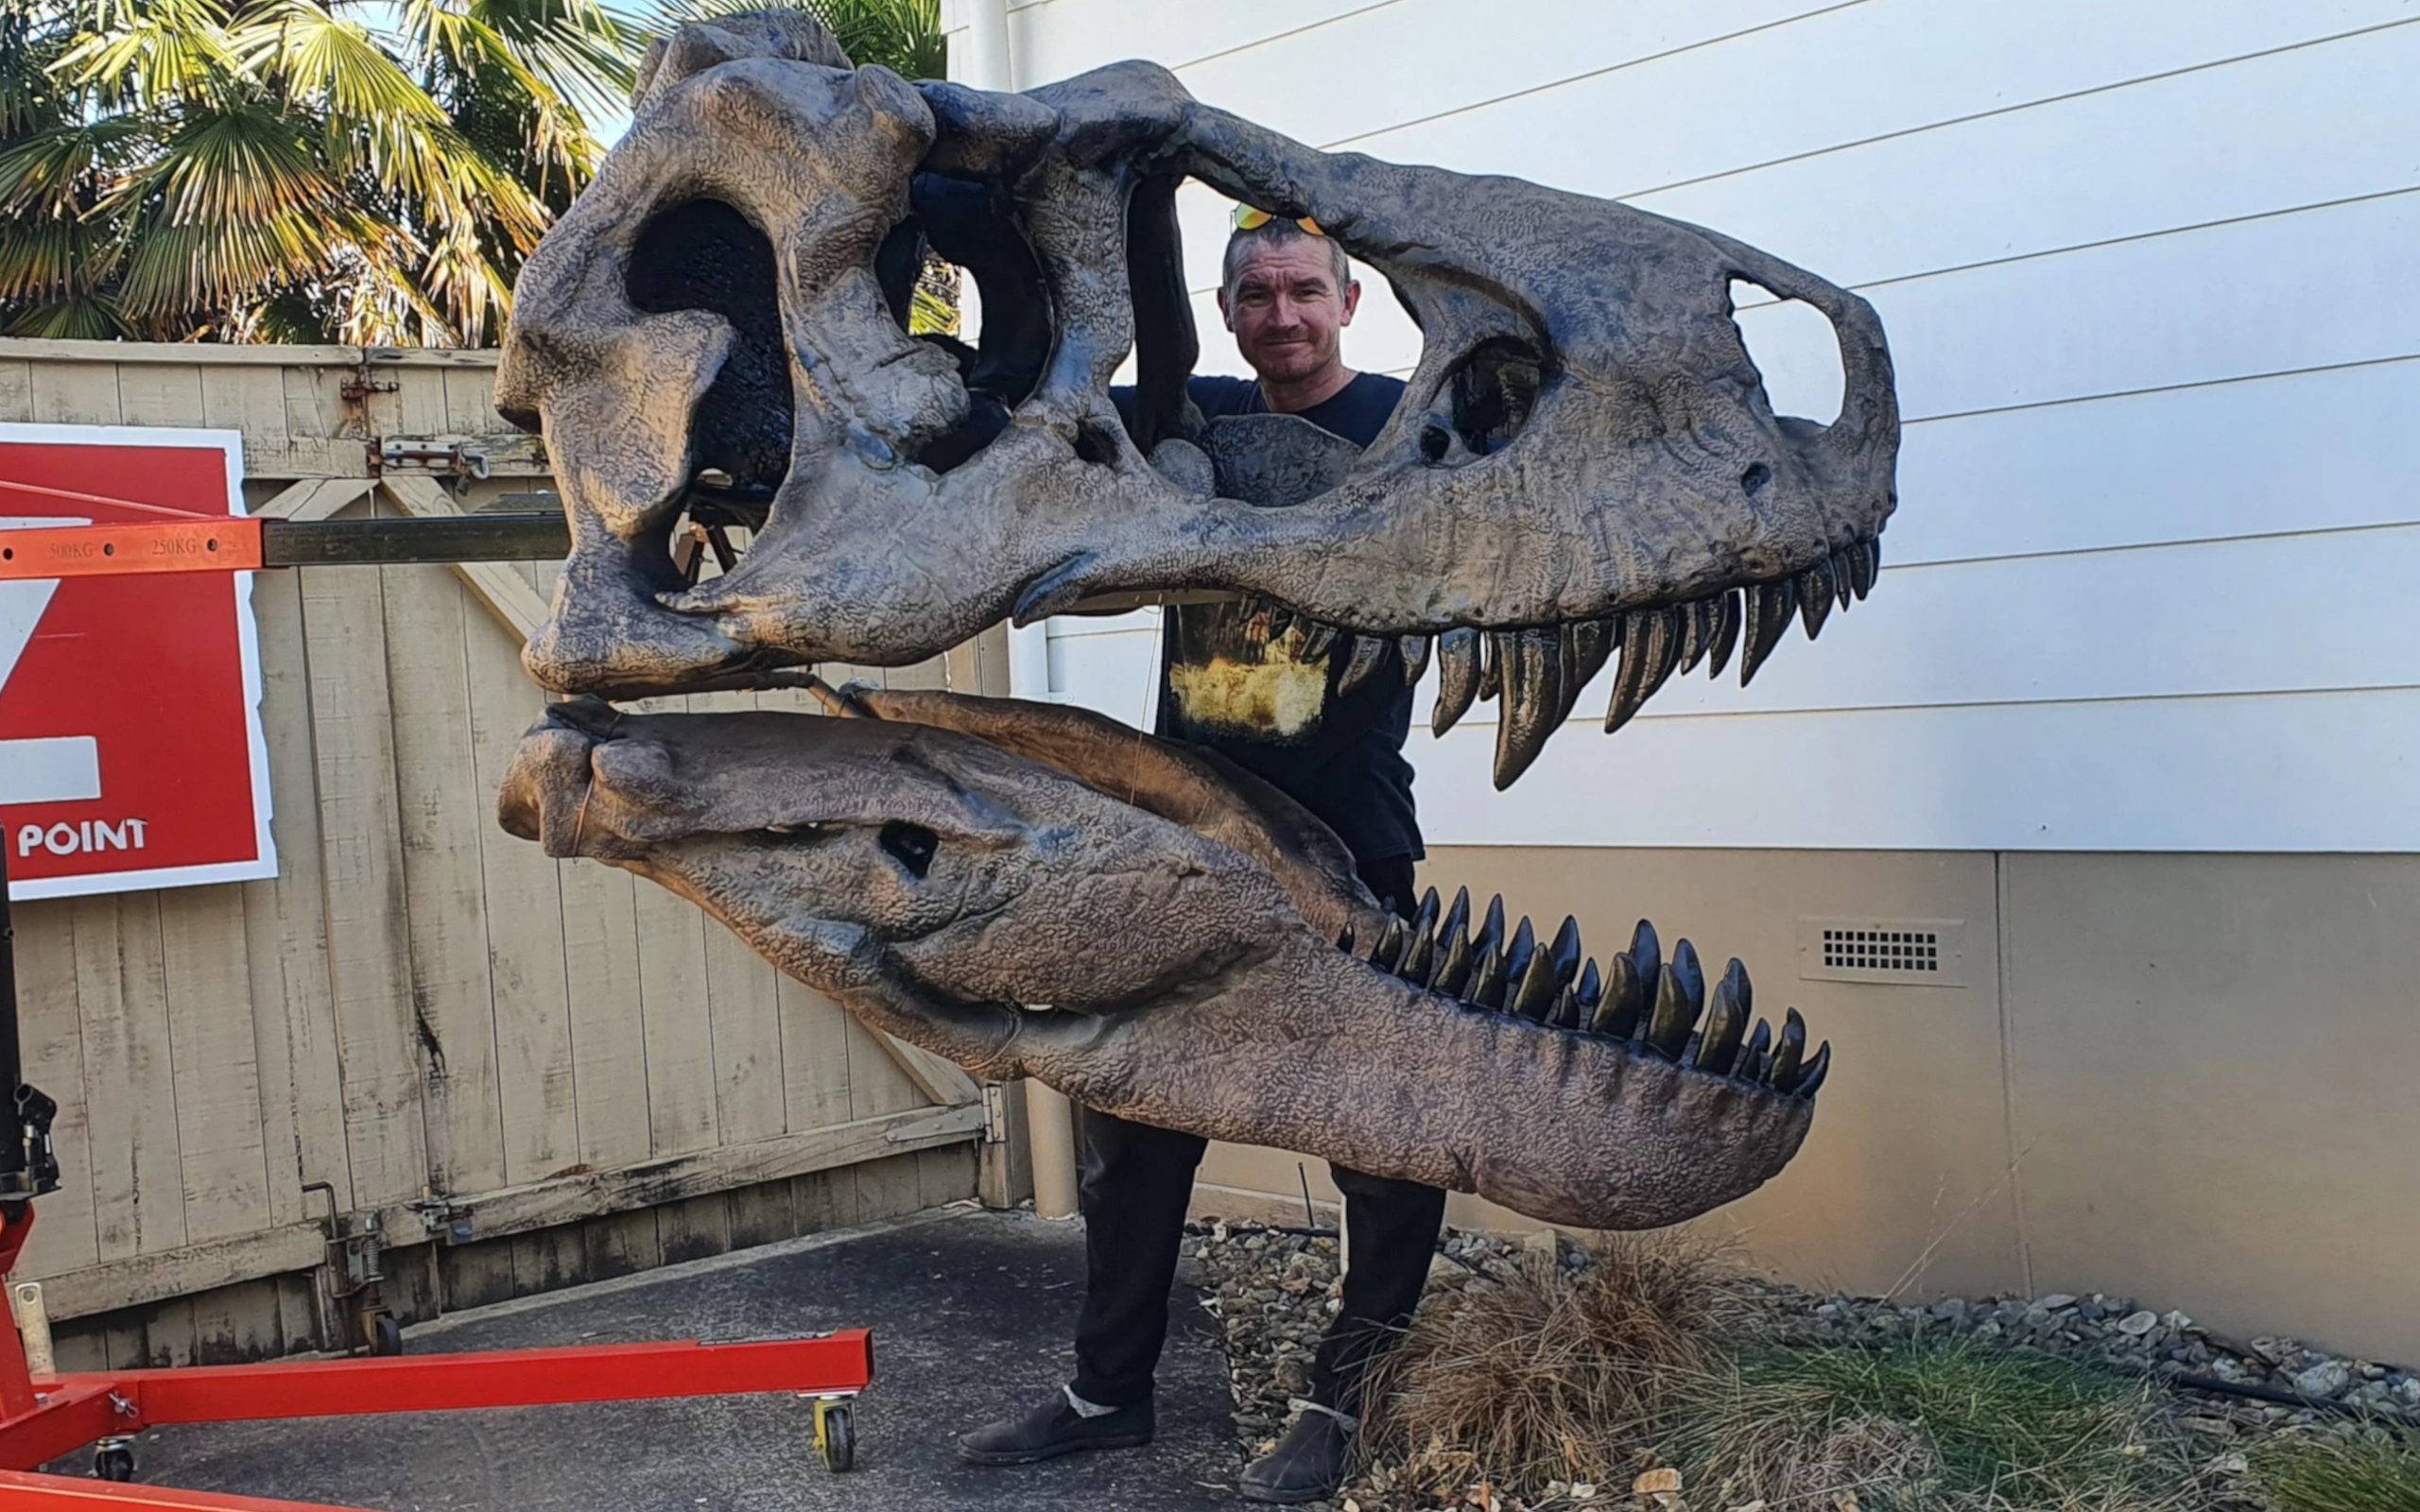 This Giant 3D Printed Tyrannosaurus Rex Was Built Using VR Sculpting